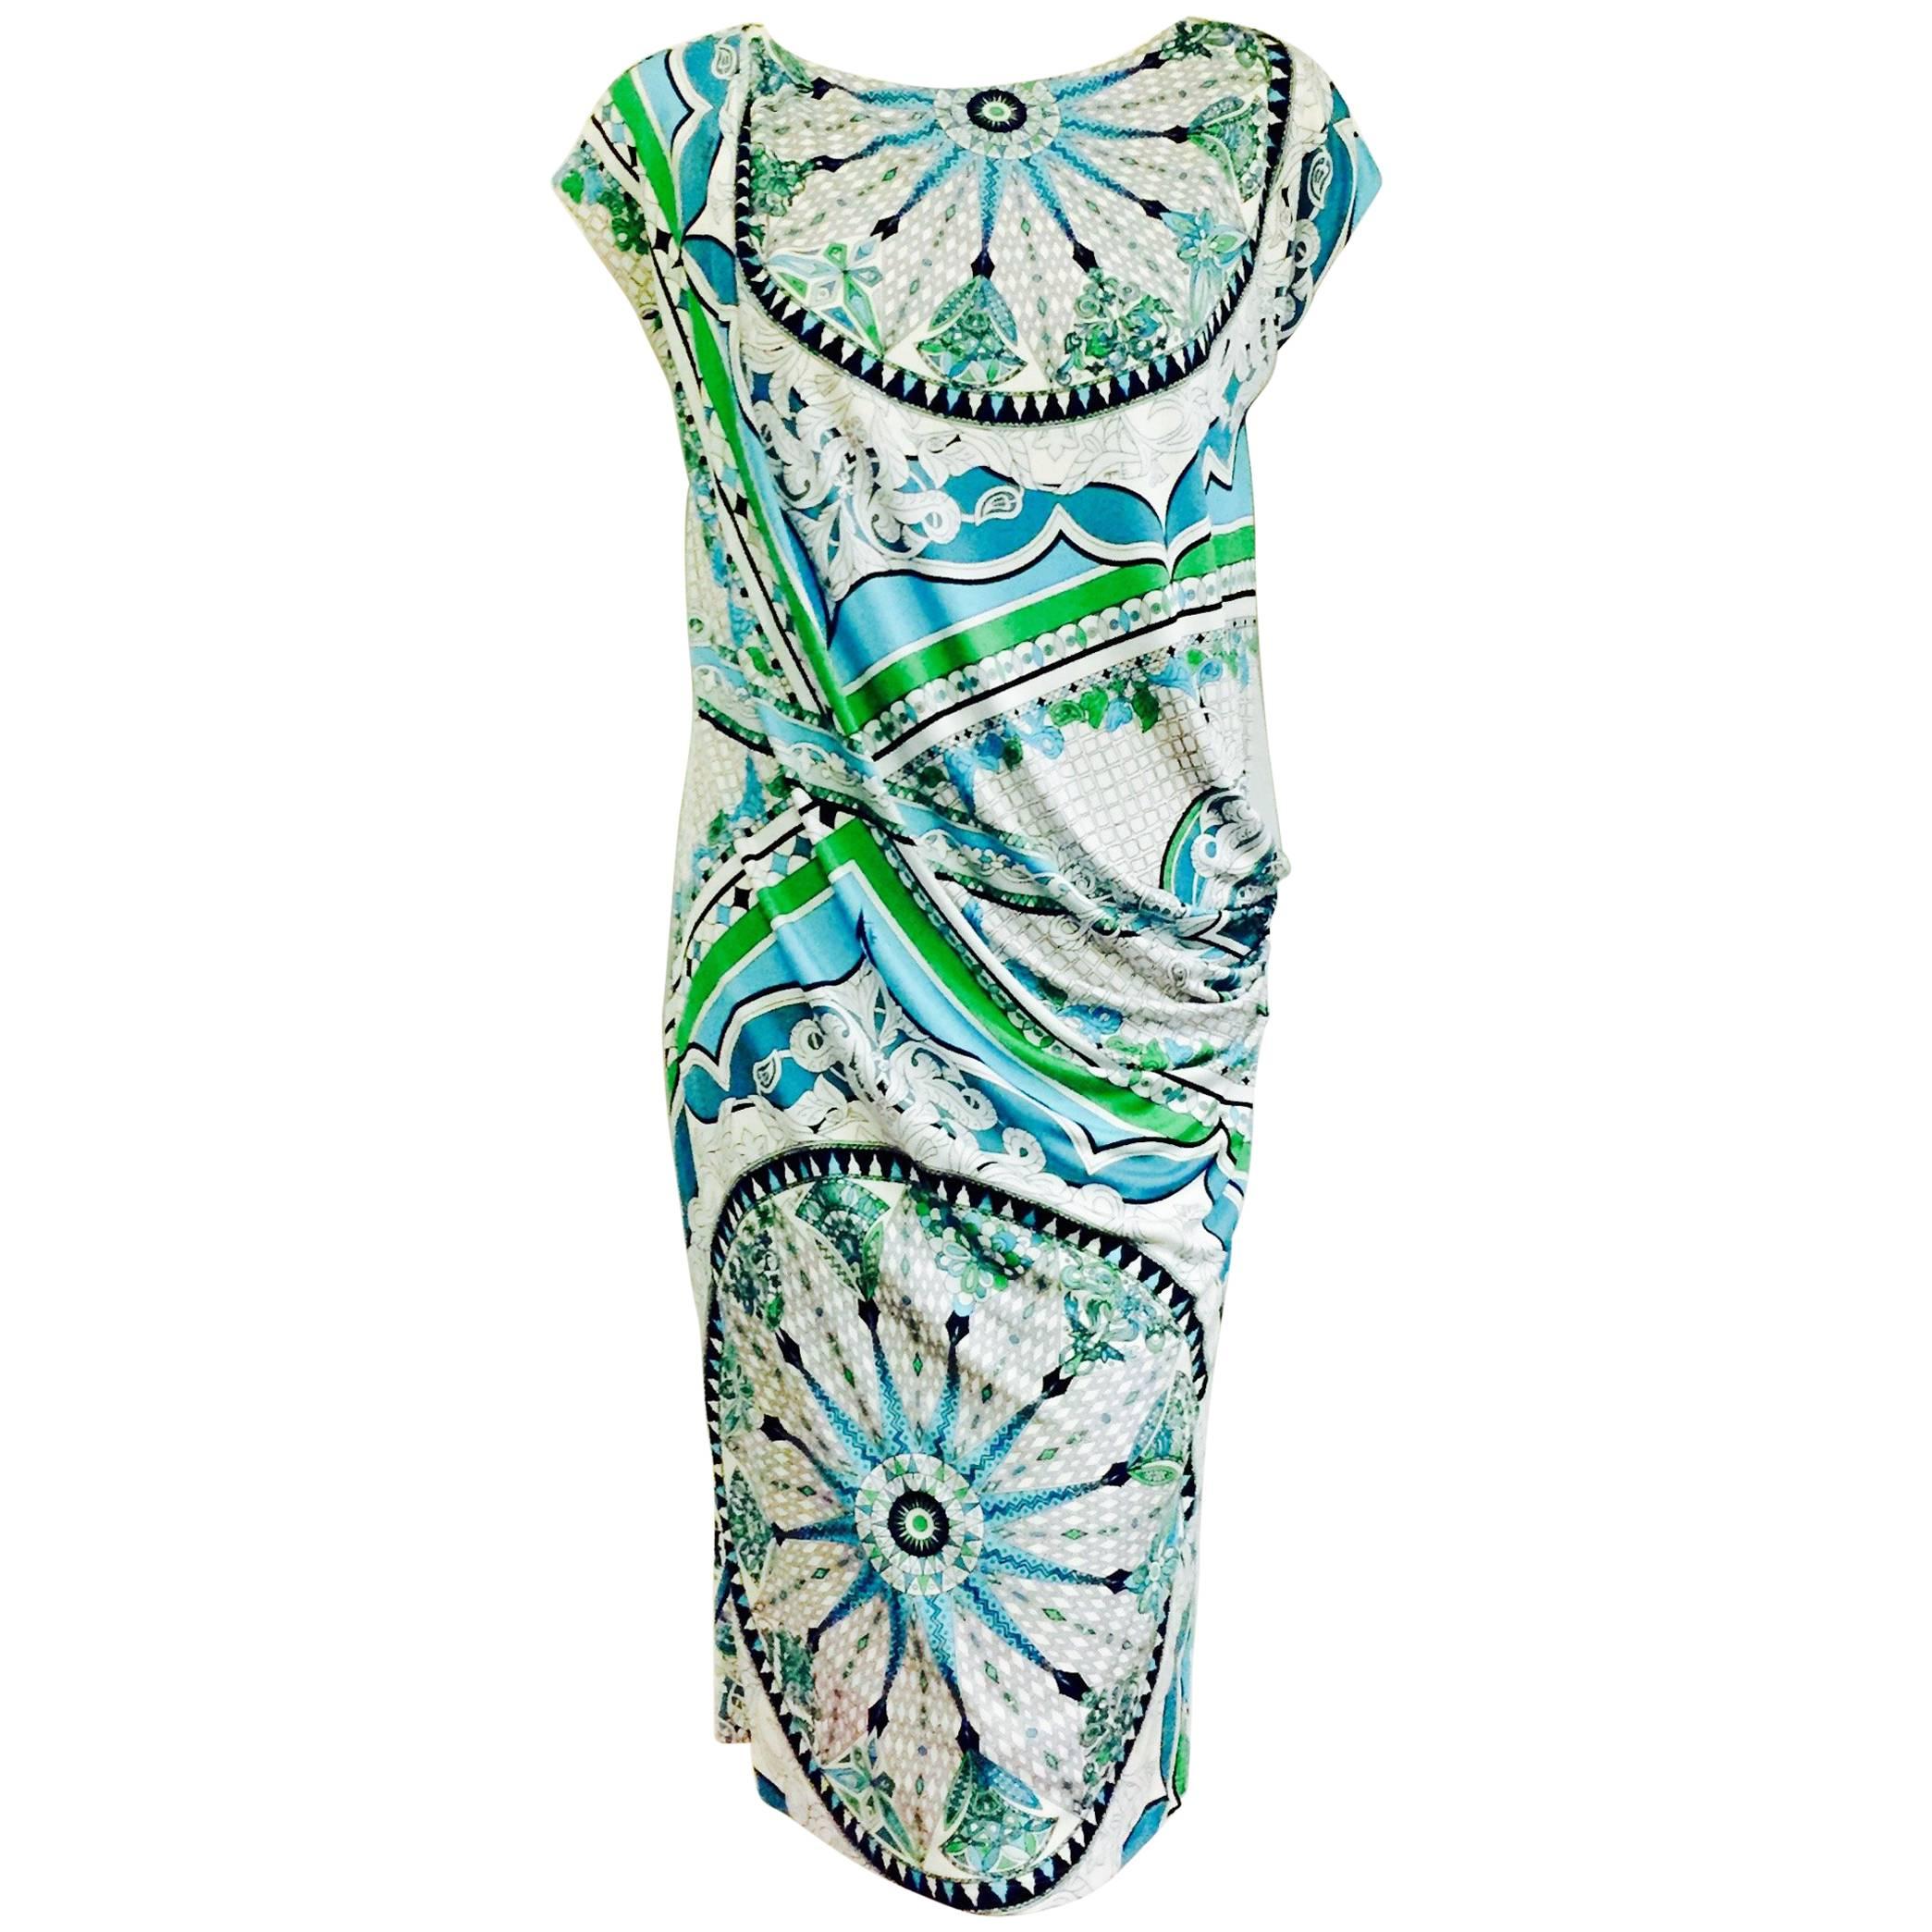 Extraordinary Emilio Pucci Vintage Chemise Dress in Turquoise and Green 